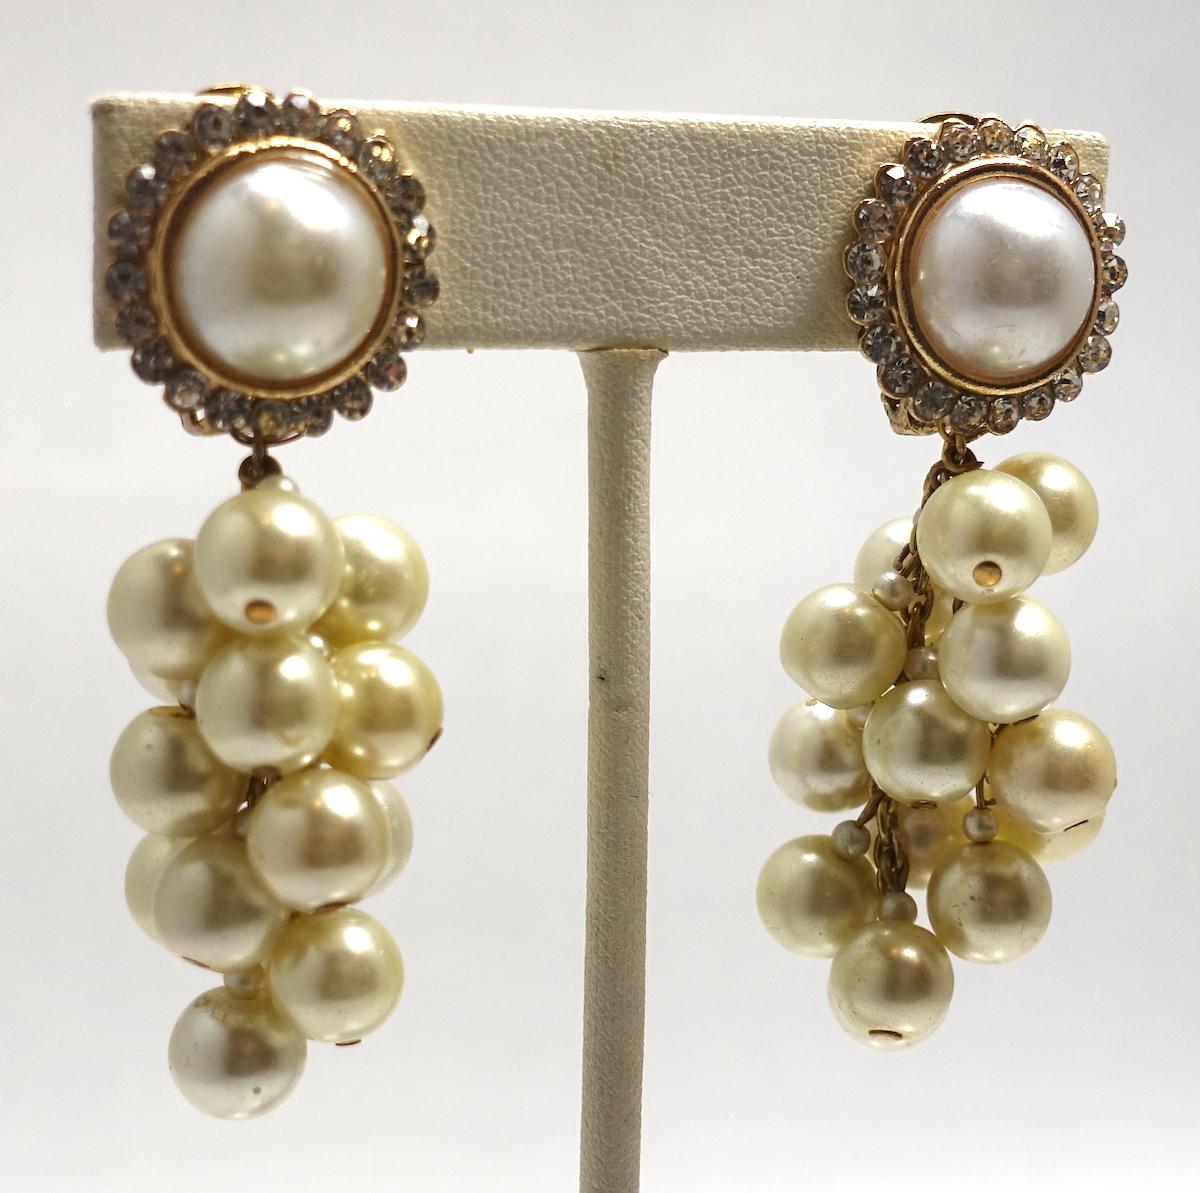 These vintage signed DeMario earrings feature faux pearls with clear crystal accents in a gold-tone setting.  These clip earrings measure 2-1/4” x apx 1”, are signed “DeMario” and are in excellent condition.